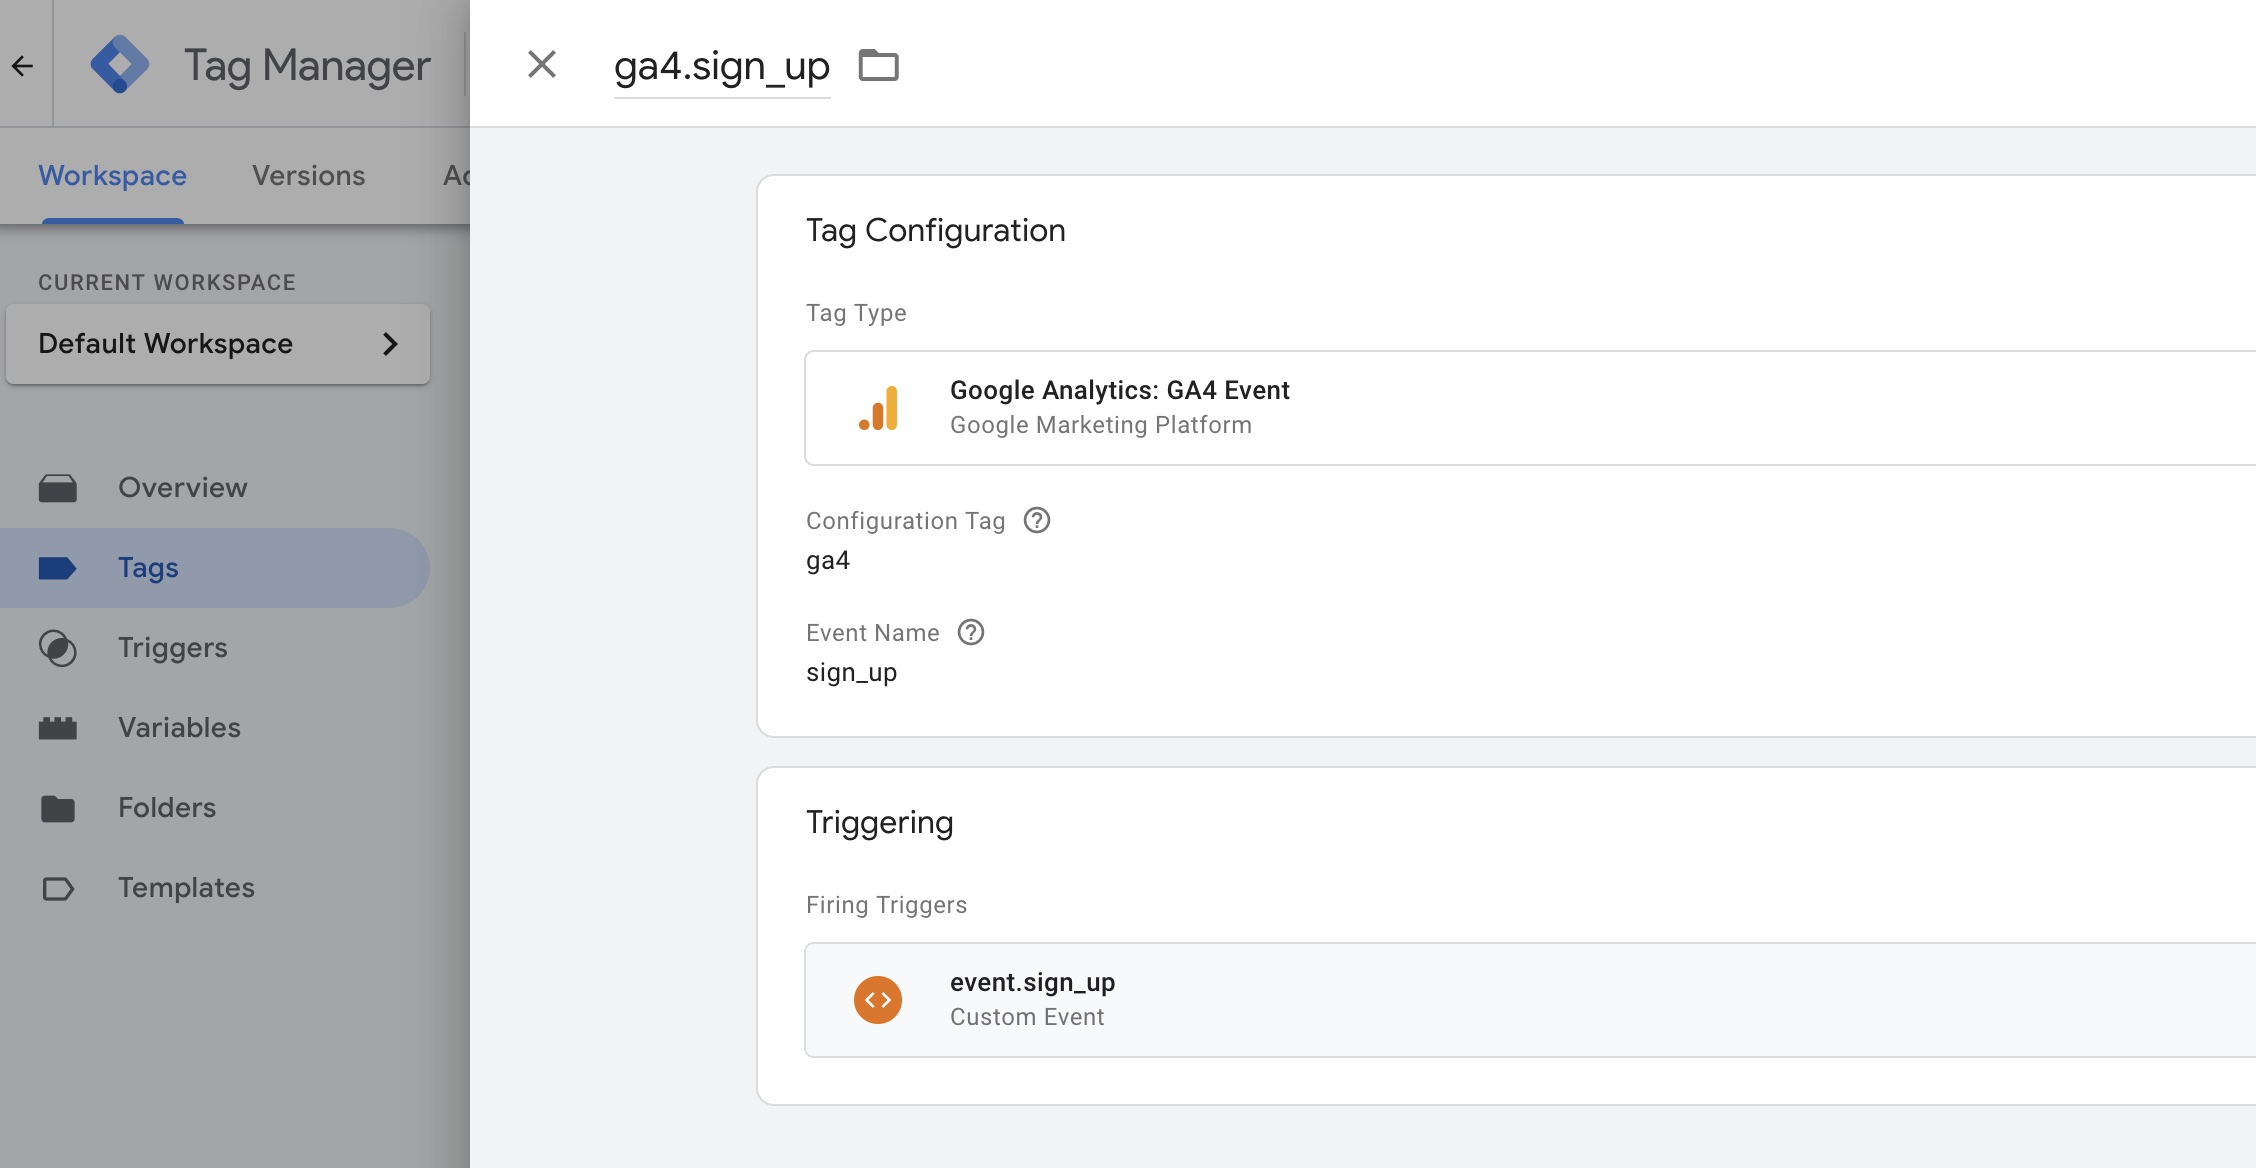 A screenshot of the finished GA4 event tag that tracks signups